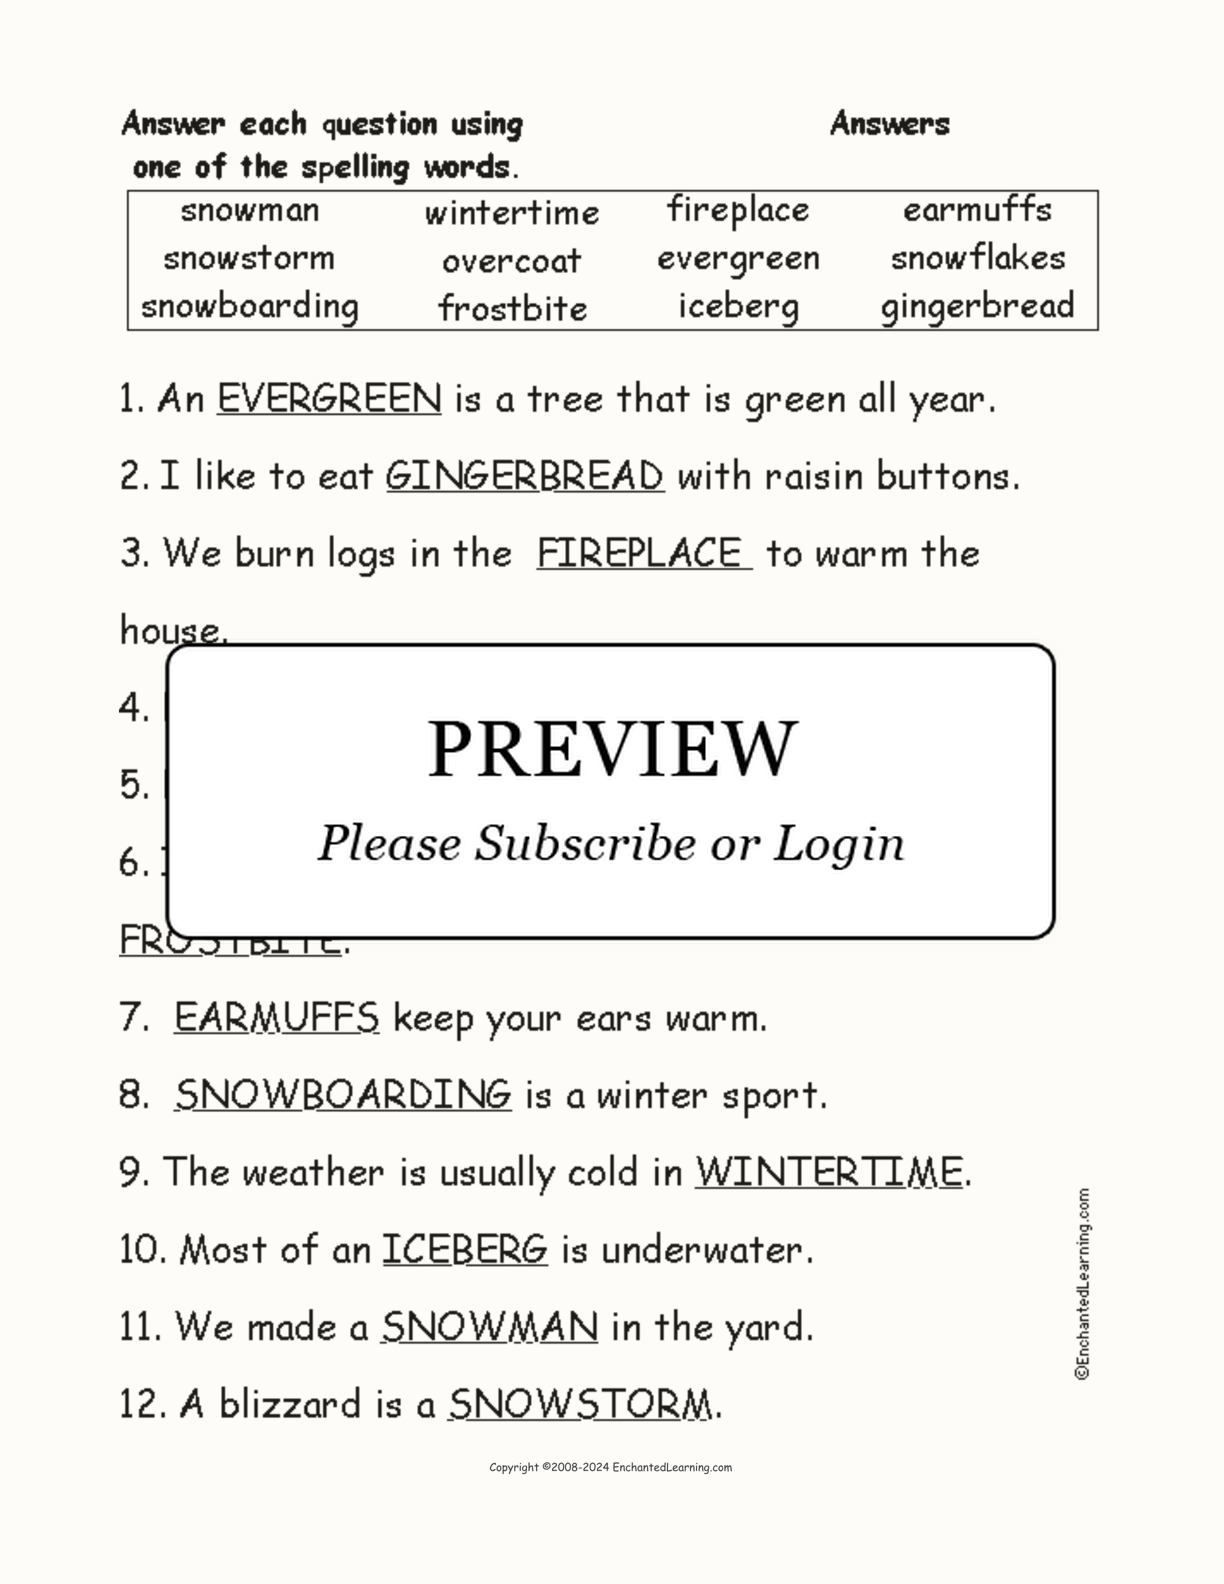 Compound Winter Words interactive worksheet page 2